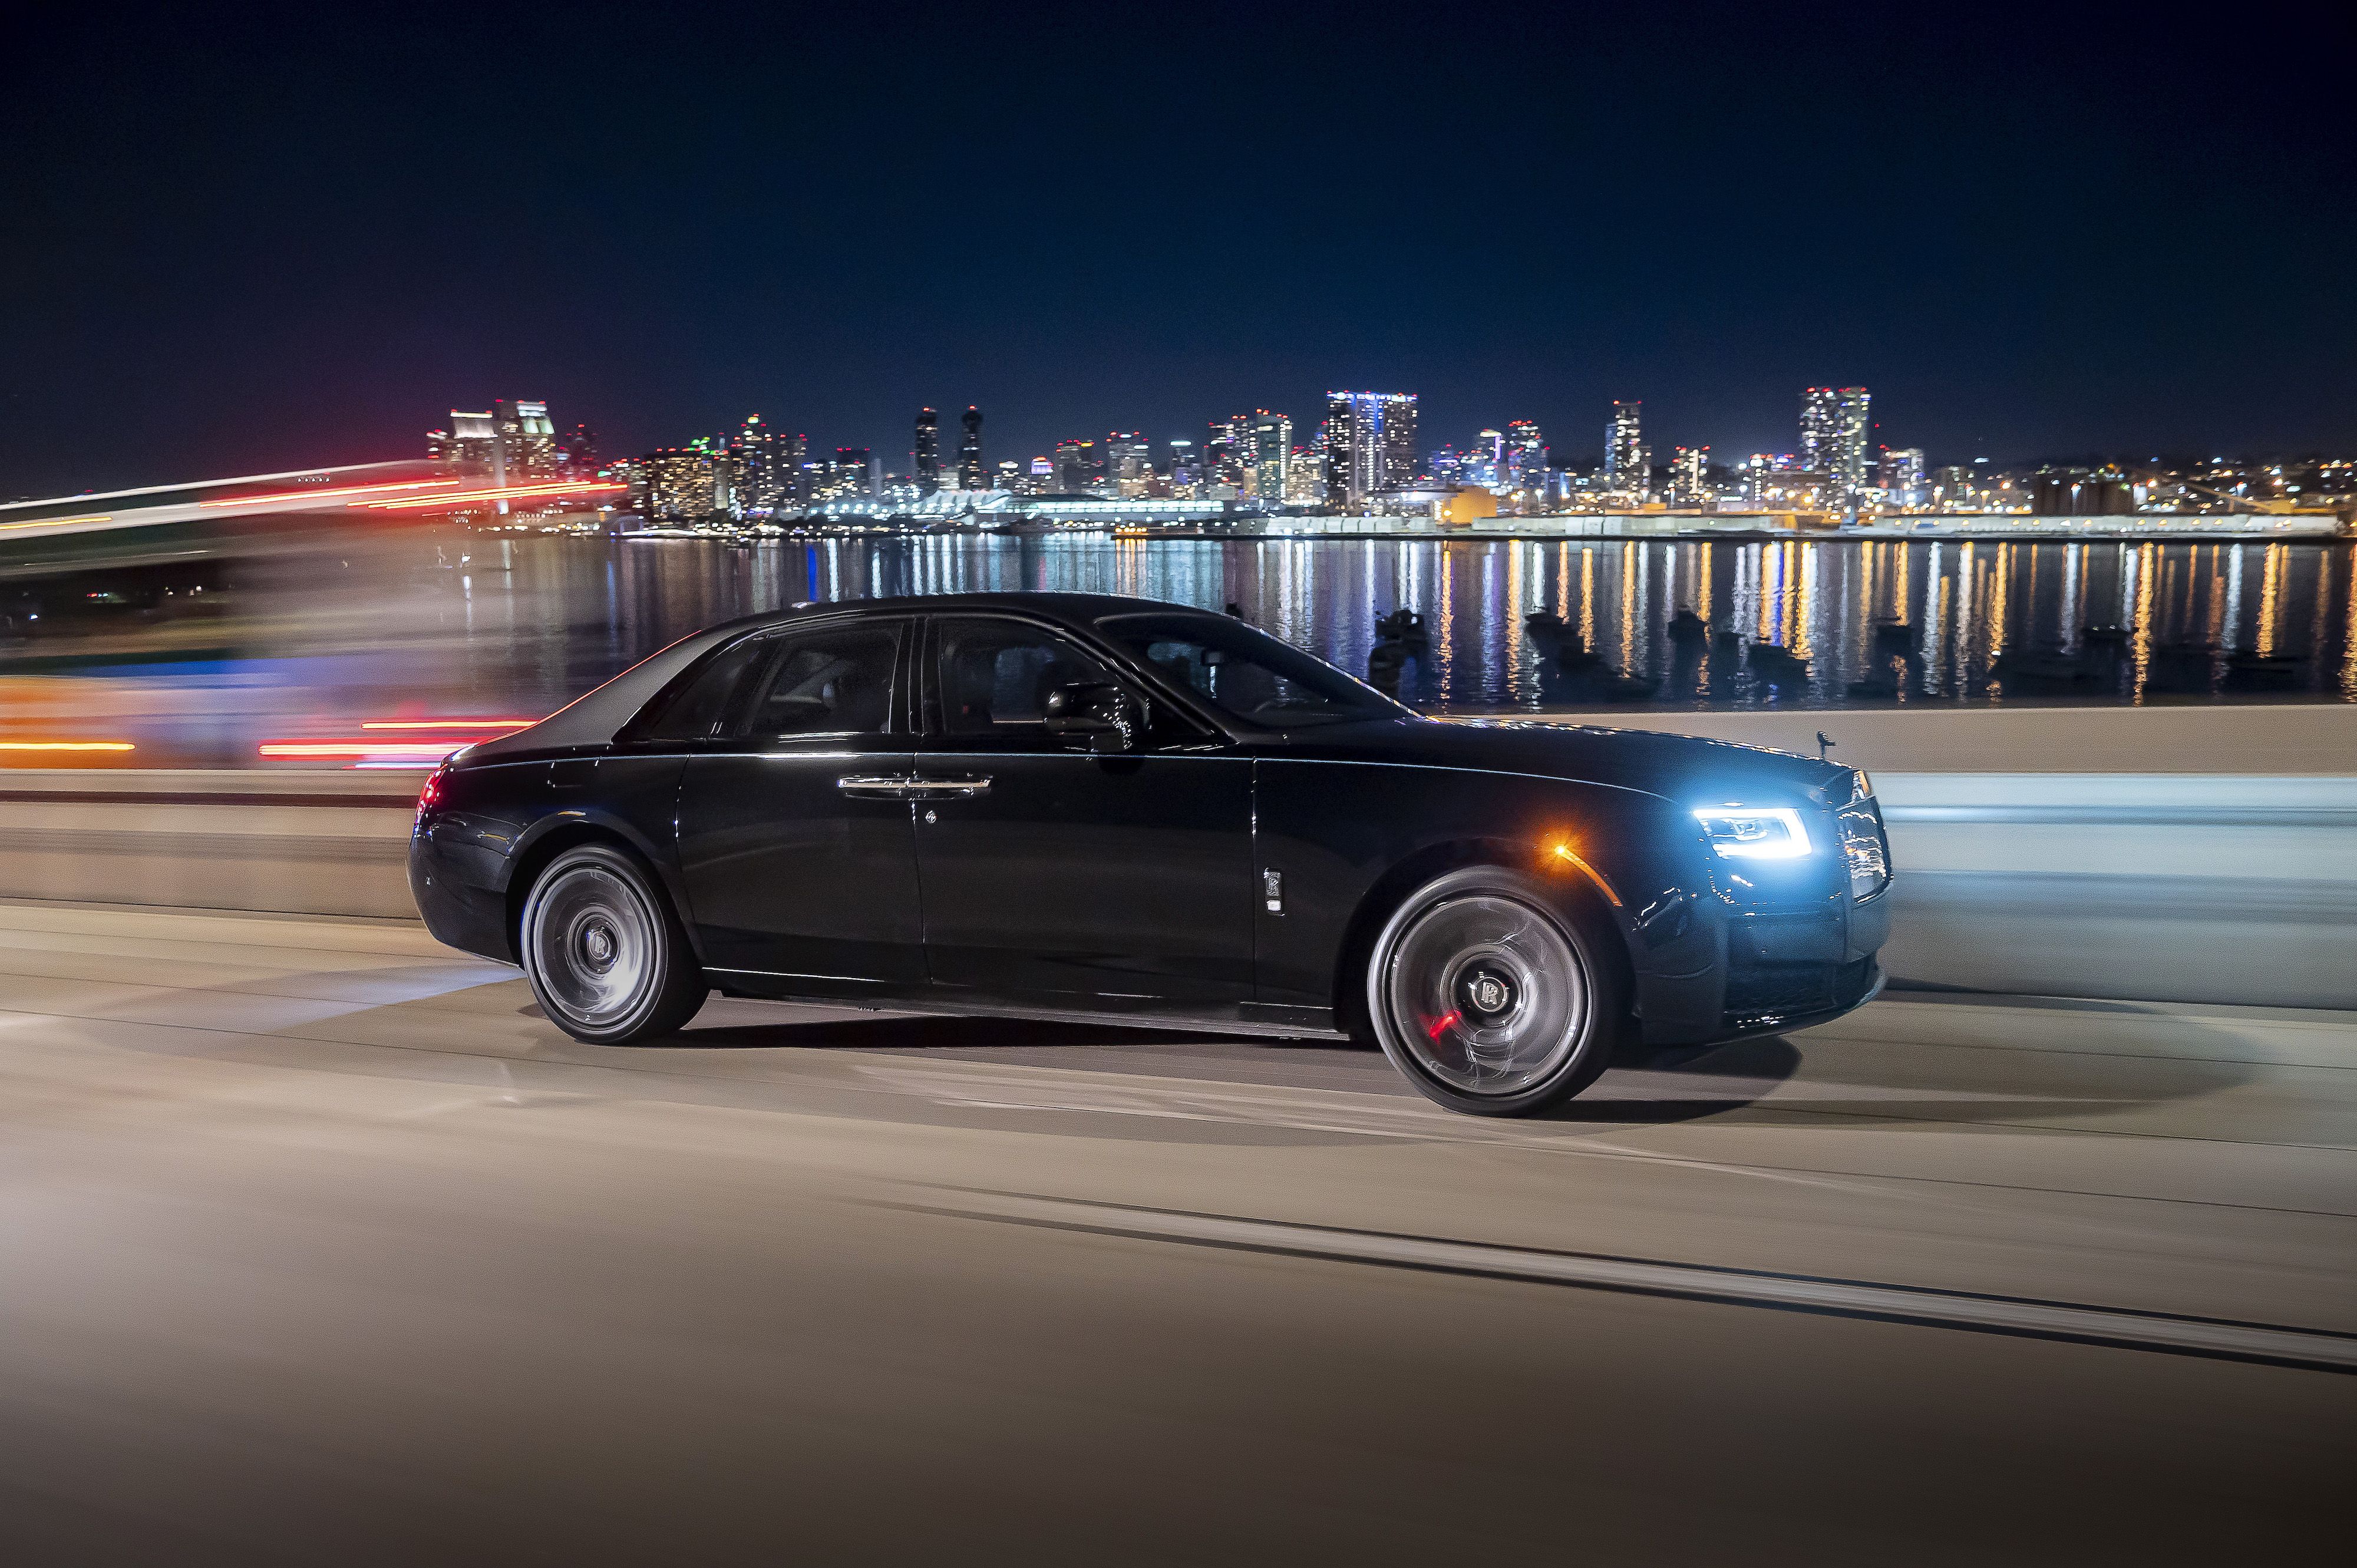 Rolls-Royce Ghost Extended adds more legroom without you knowing